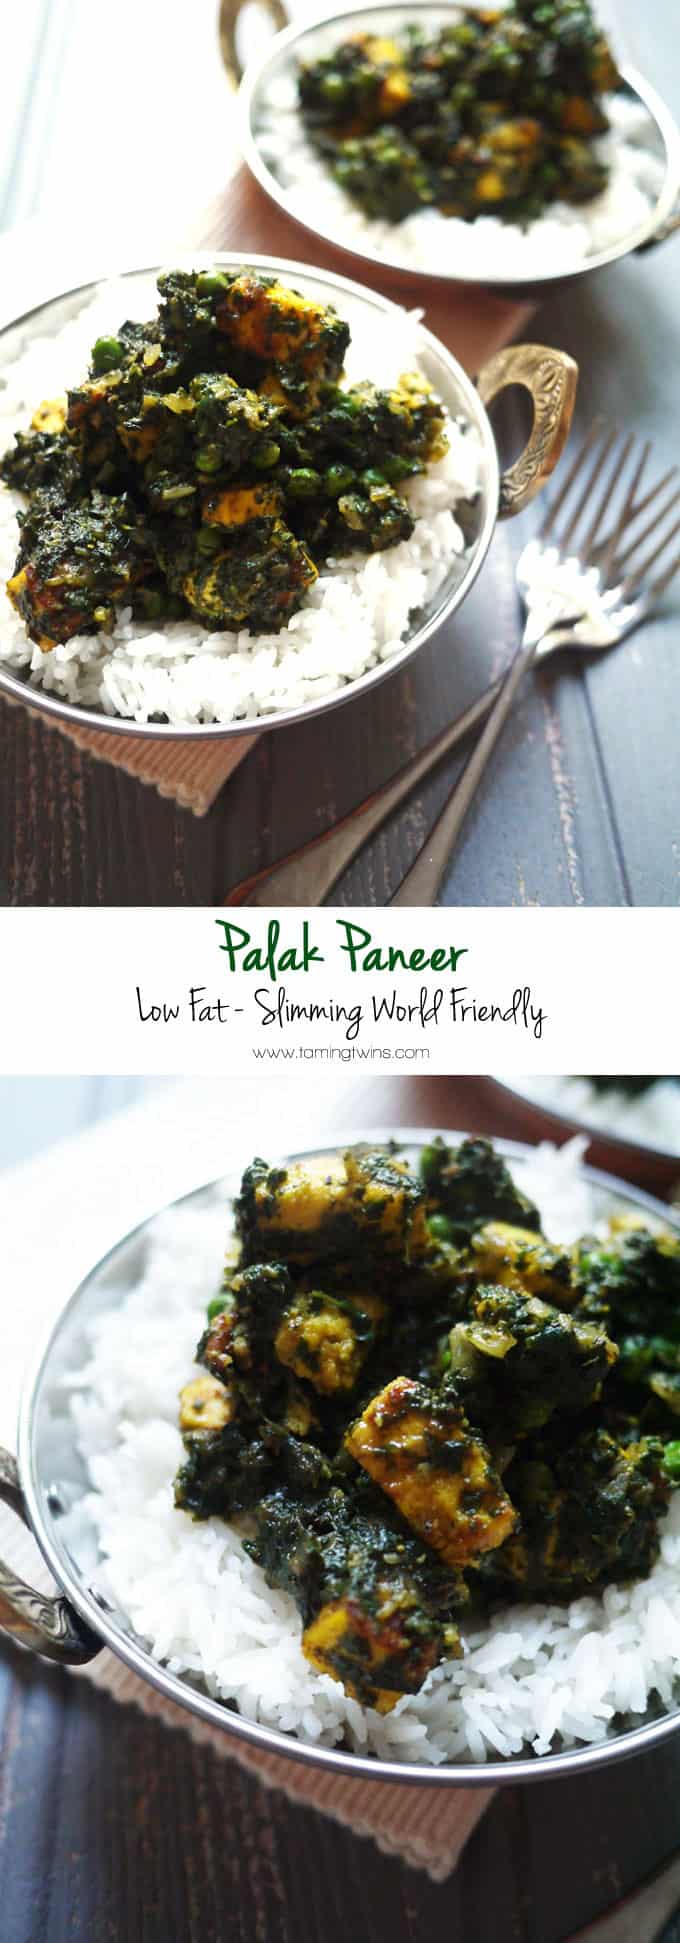 Palak Paneer - Slimming World friendly, low fat recipe for this favourite vegetarian curry. 